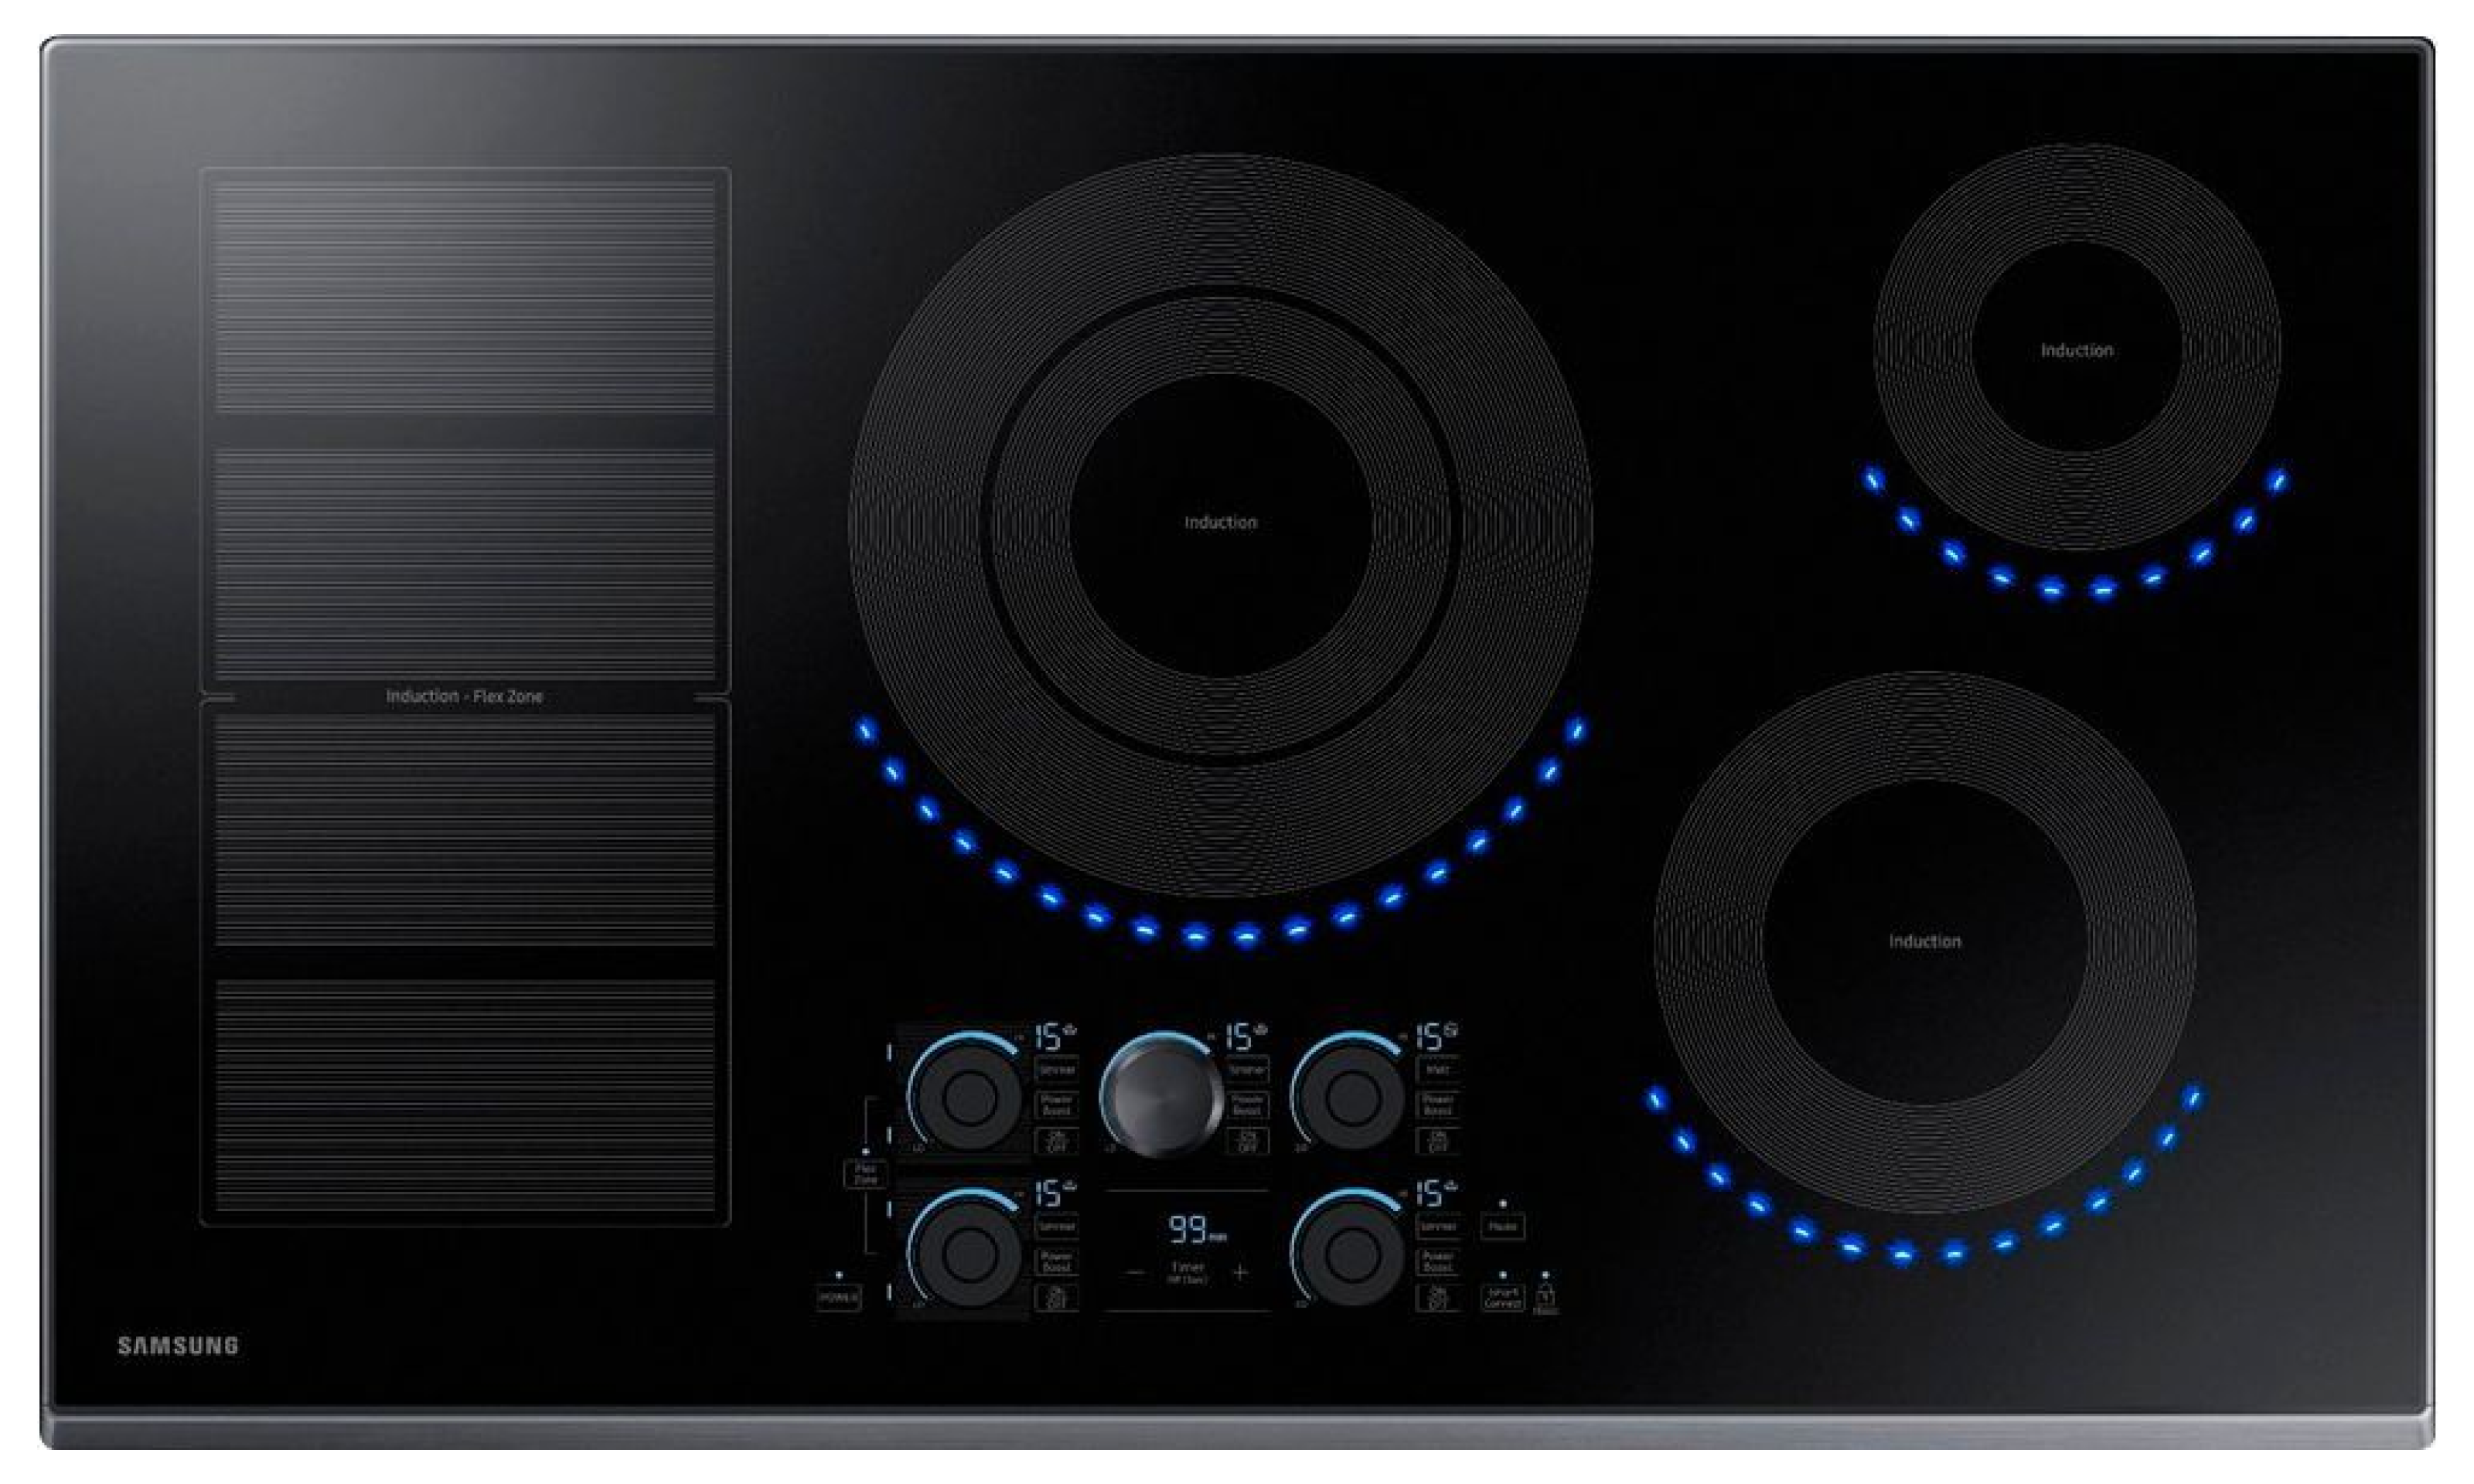 Samsung 36" Induction Cooktop with WiFi and Virtual Flame™ - Black stainless steel - NZ36K7880UG/AA